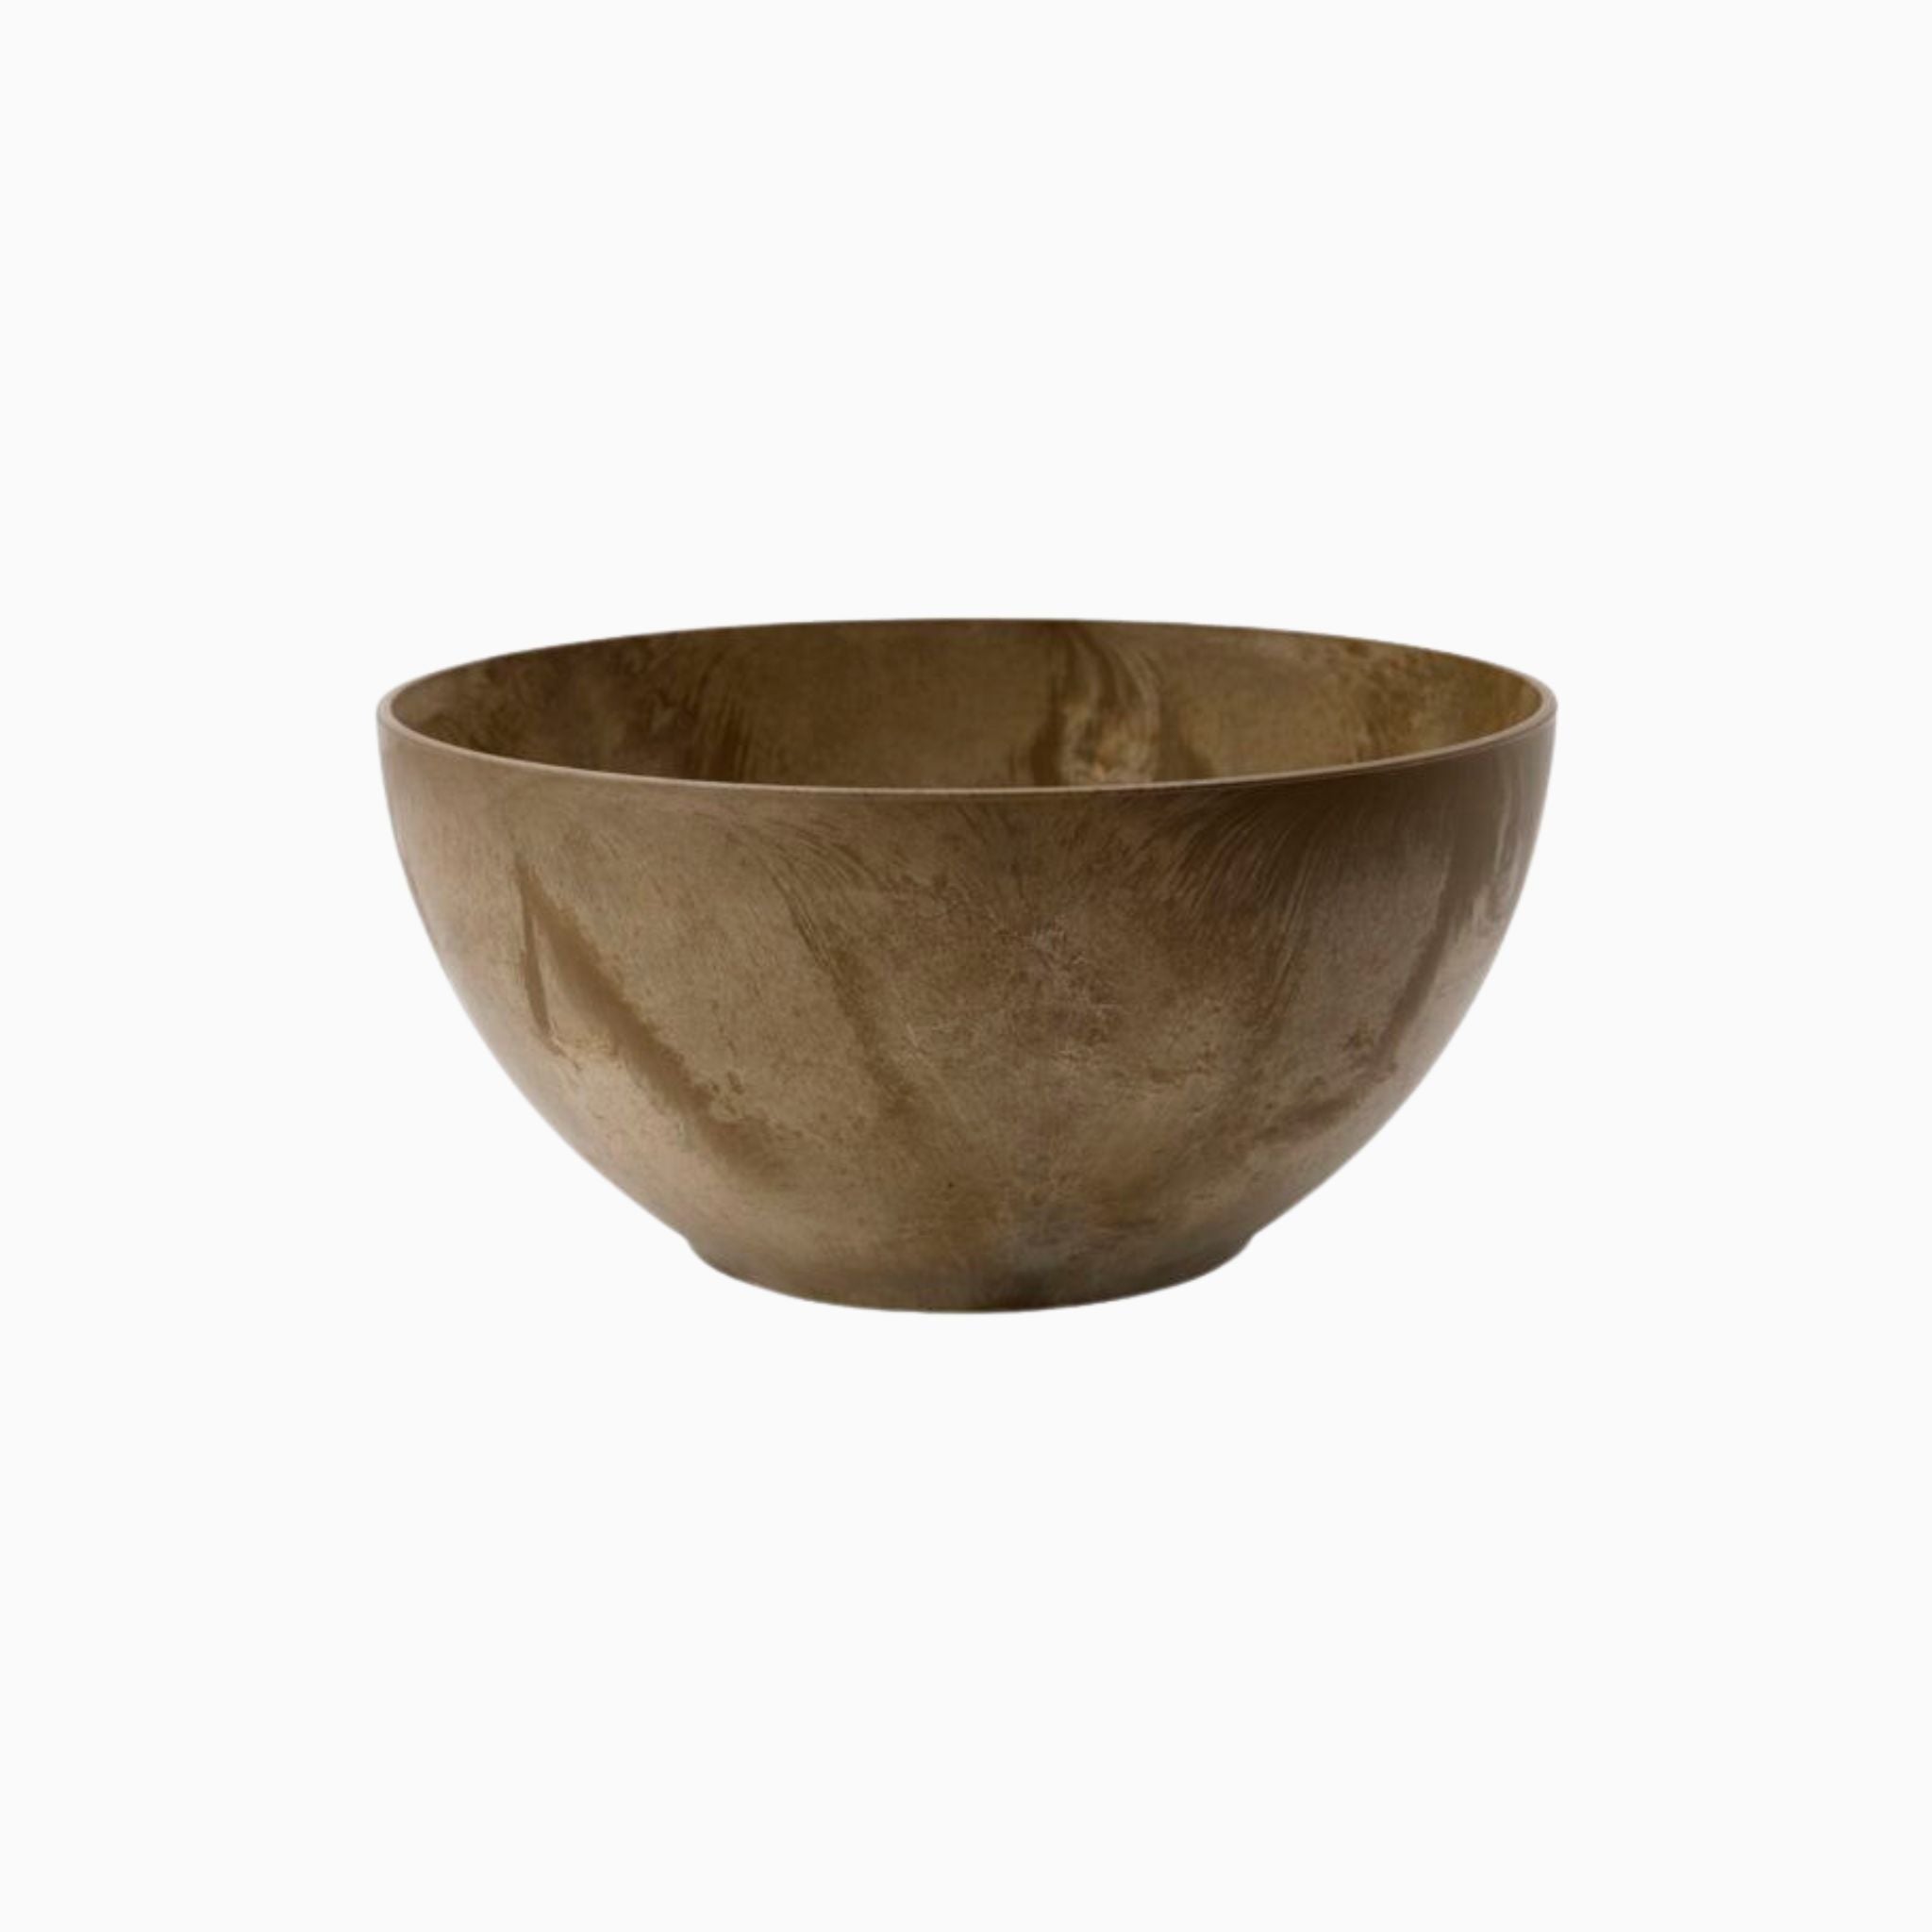 GOLD SERVING BOWL - Simply Elevated Home Furnishings 